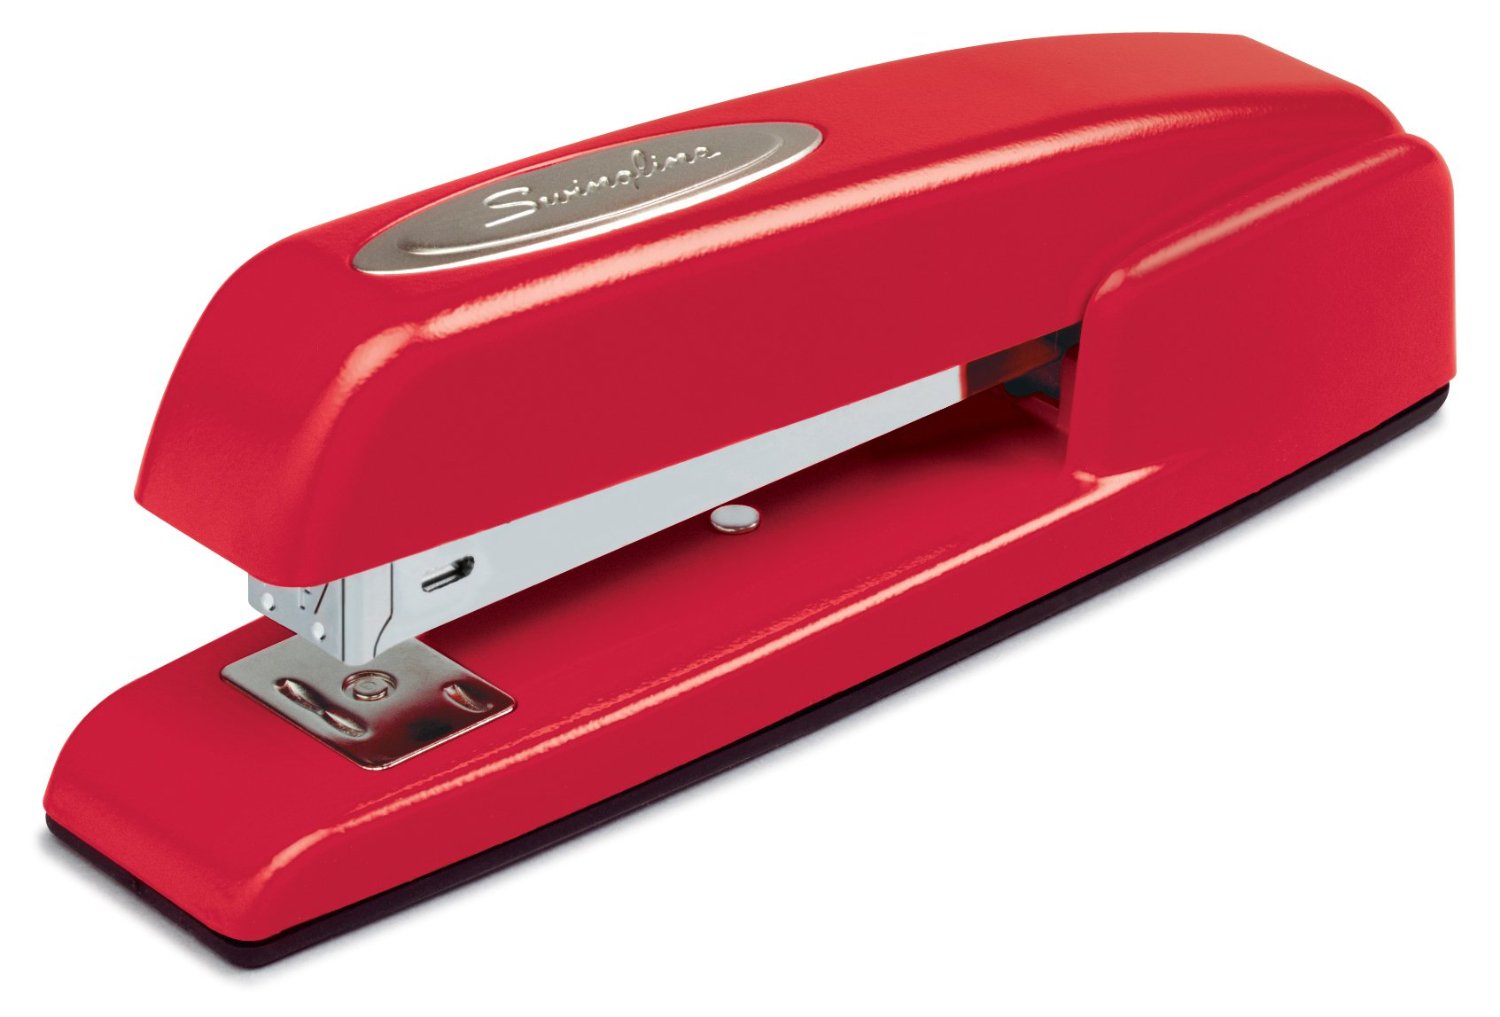 Red Swingline Stapler – “I Believe You Have My Stapler!” – Only $12.57!